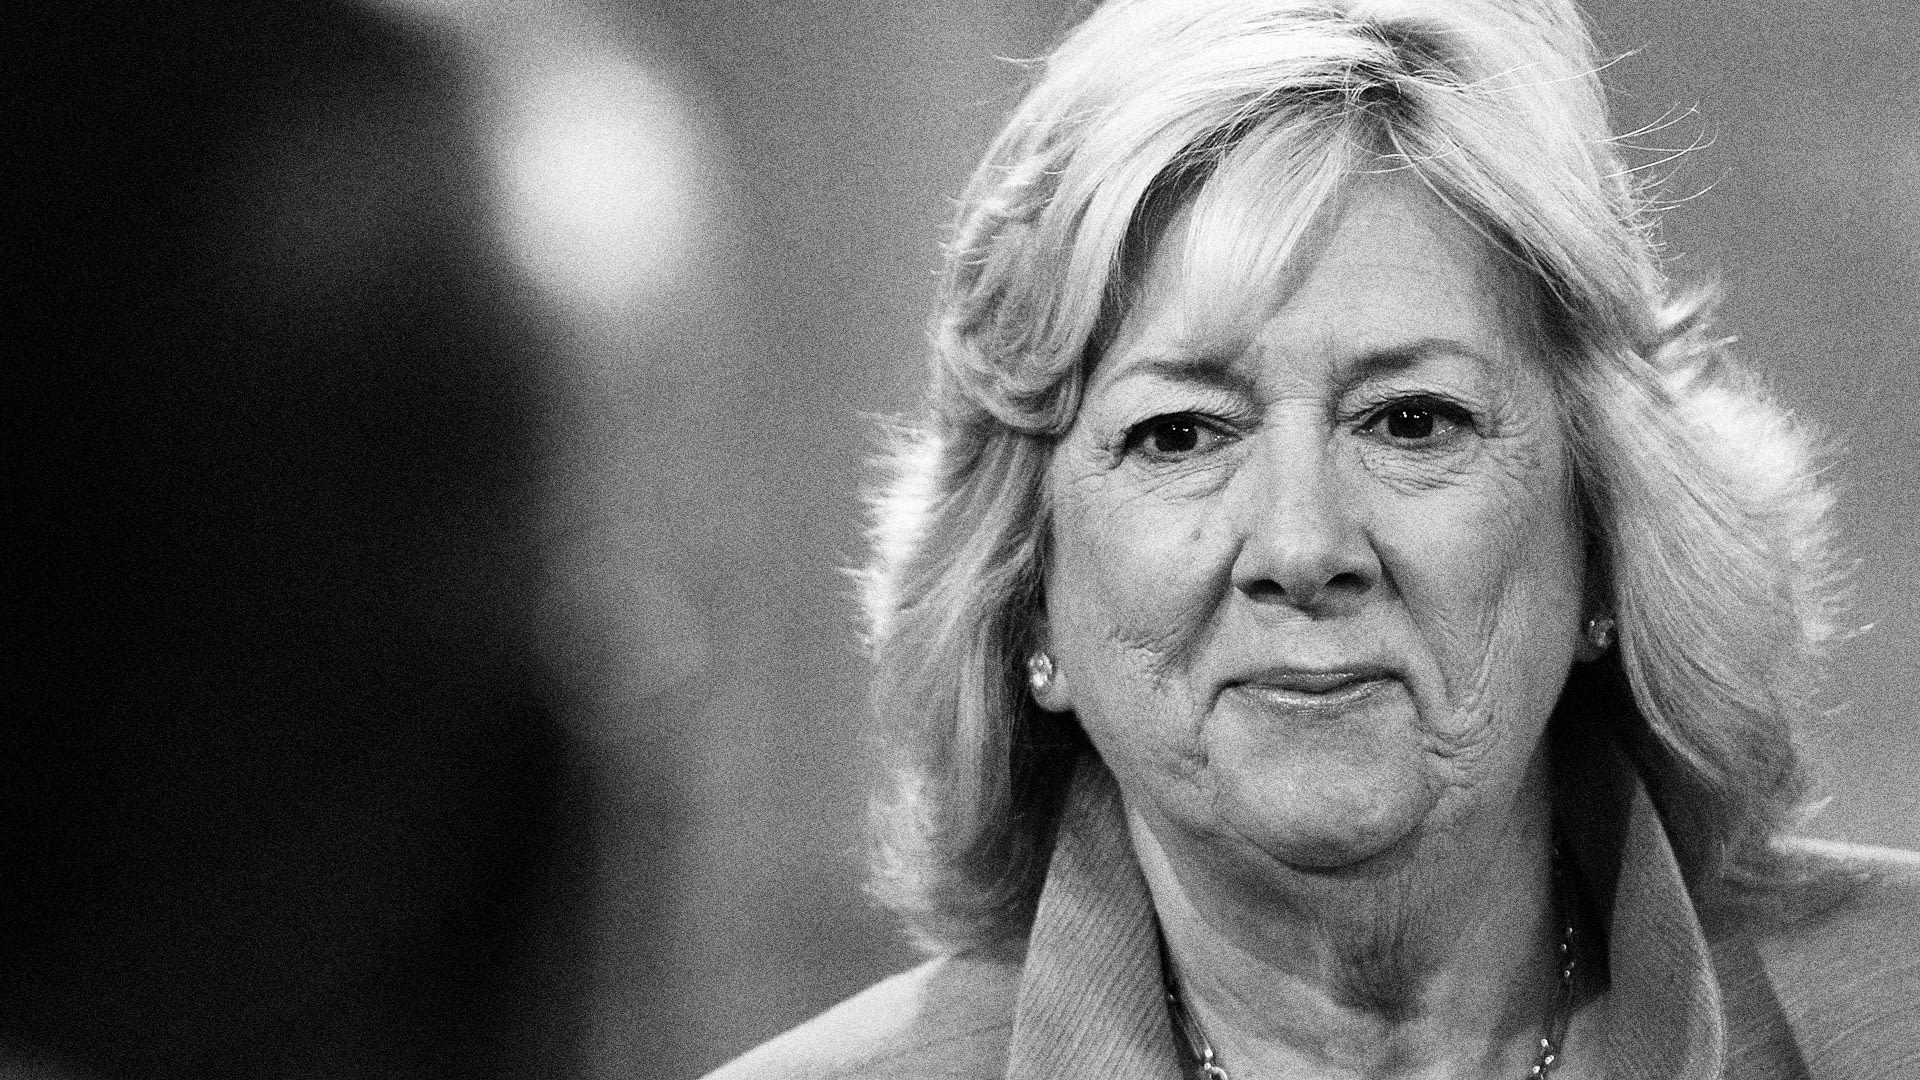 Central Park 5 prosecutor Linda Fairstein melts down over ‘When They See Us’ backlash